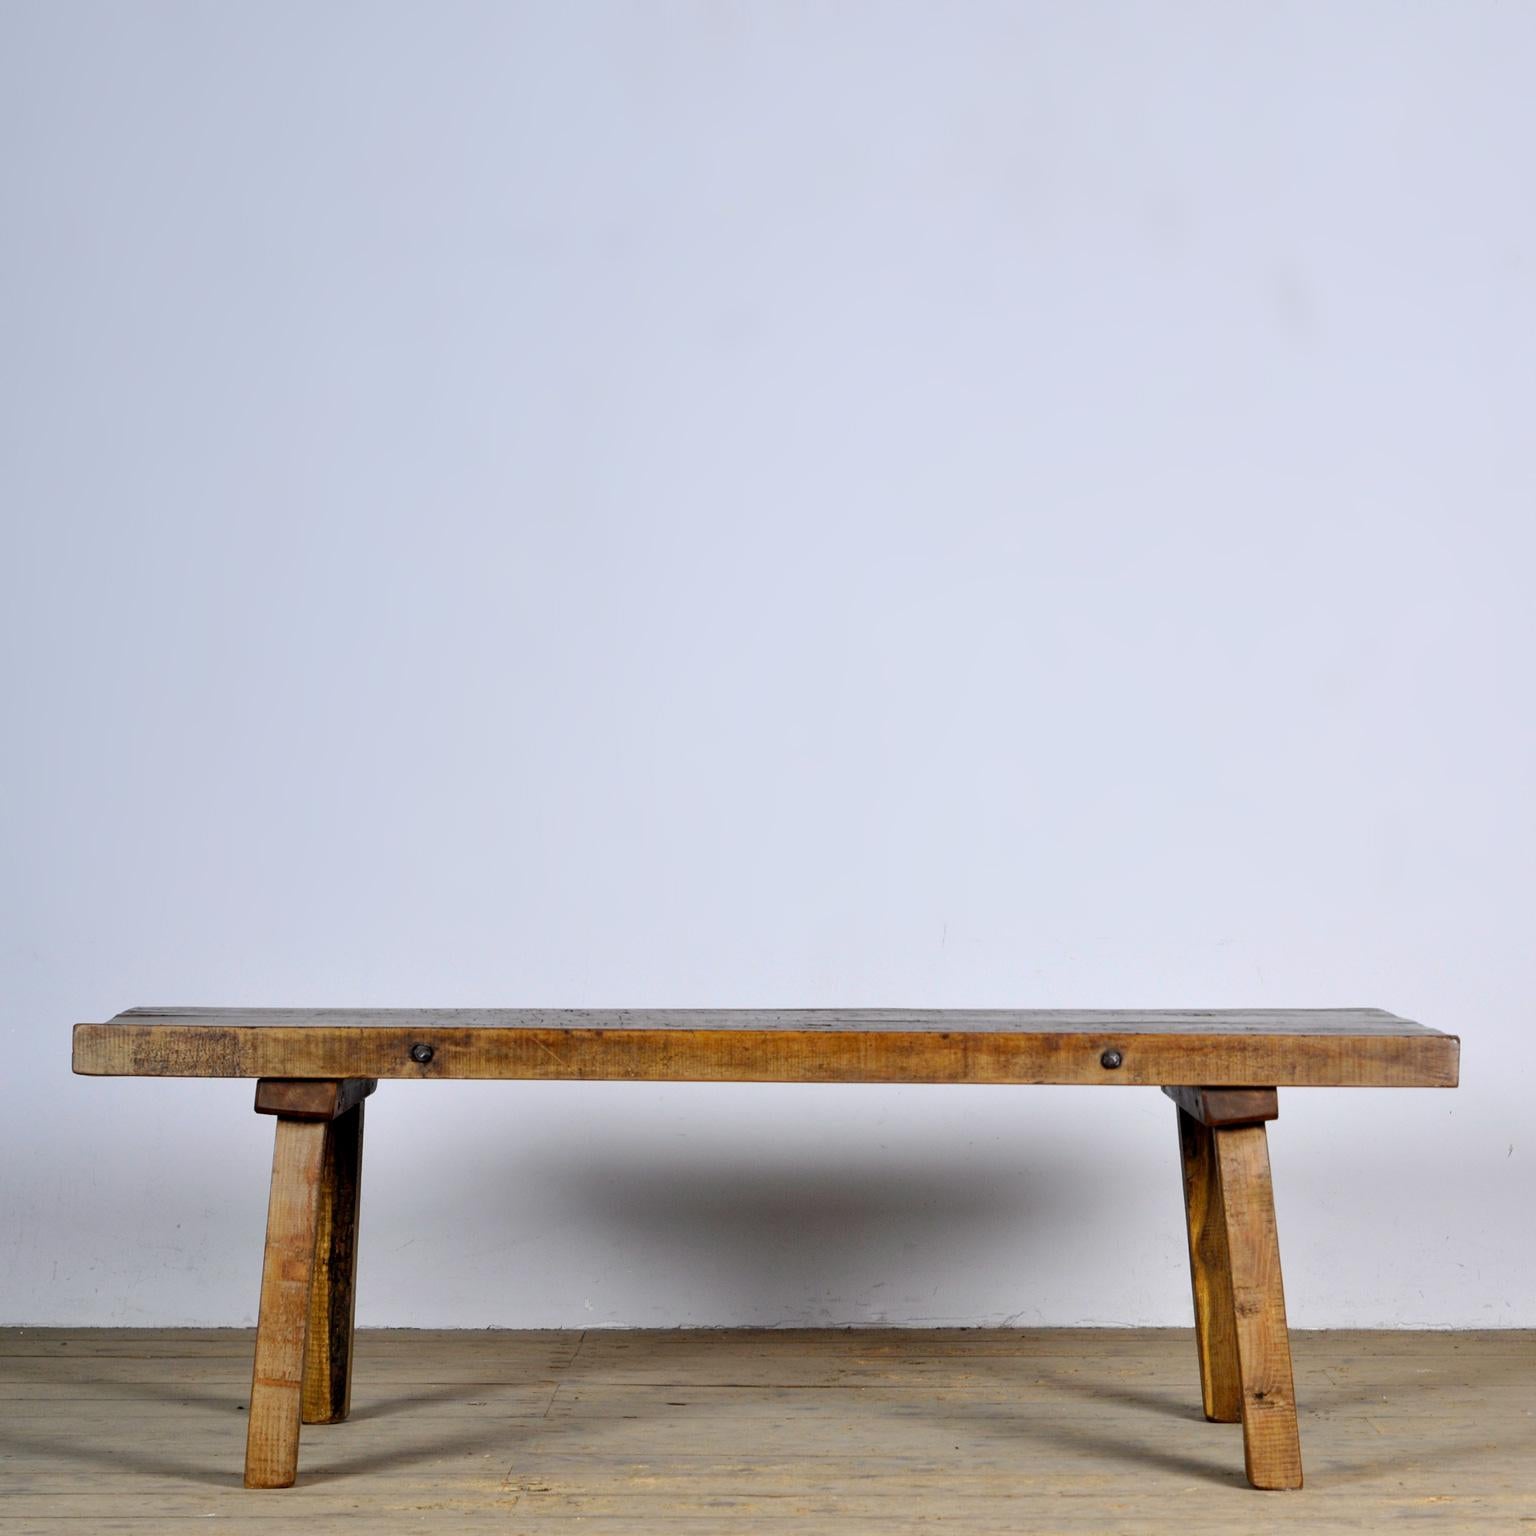 This oak butcher’s farm table was produced in hungary around the 1920s. With an oak top of 5 cm thick. The legs are shortened to the ideal height for a coffee table or bench. Treated for woodworm.